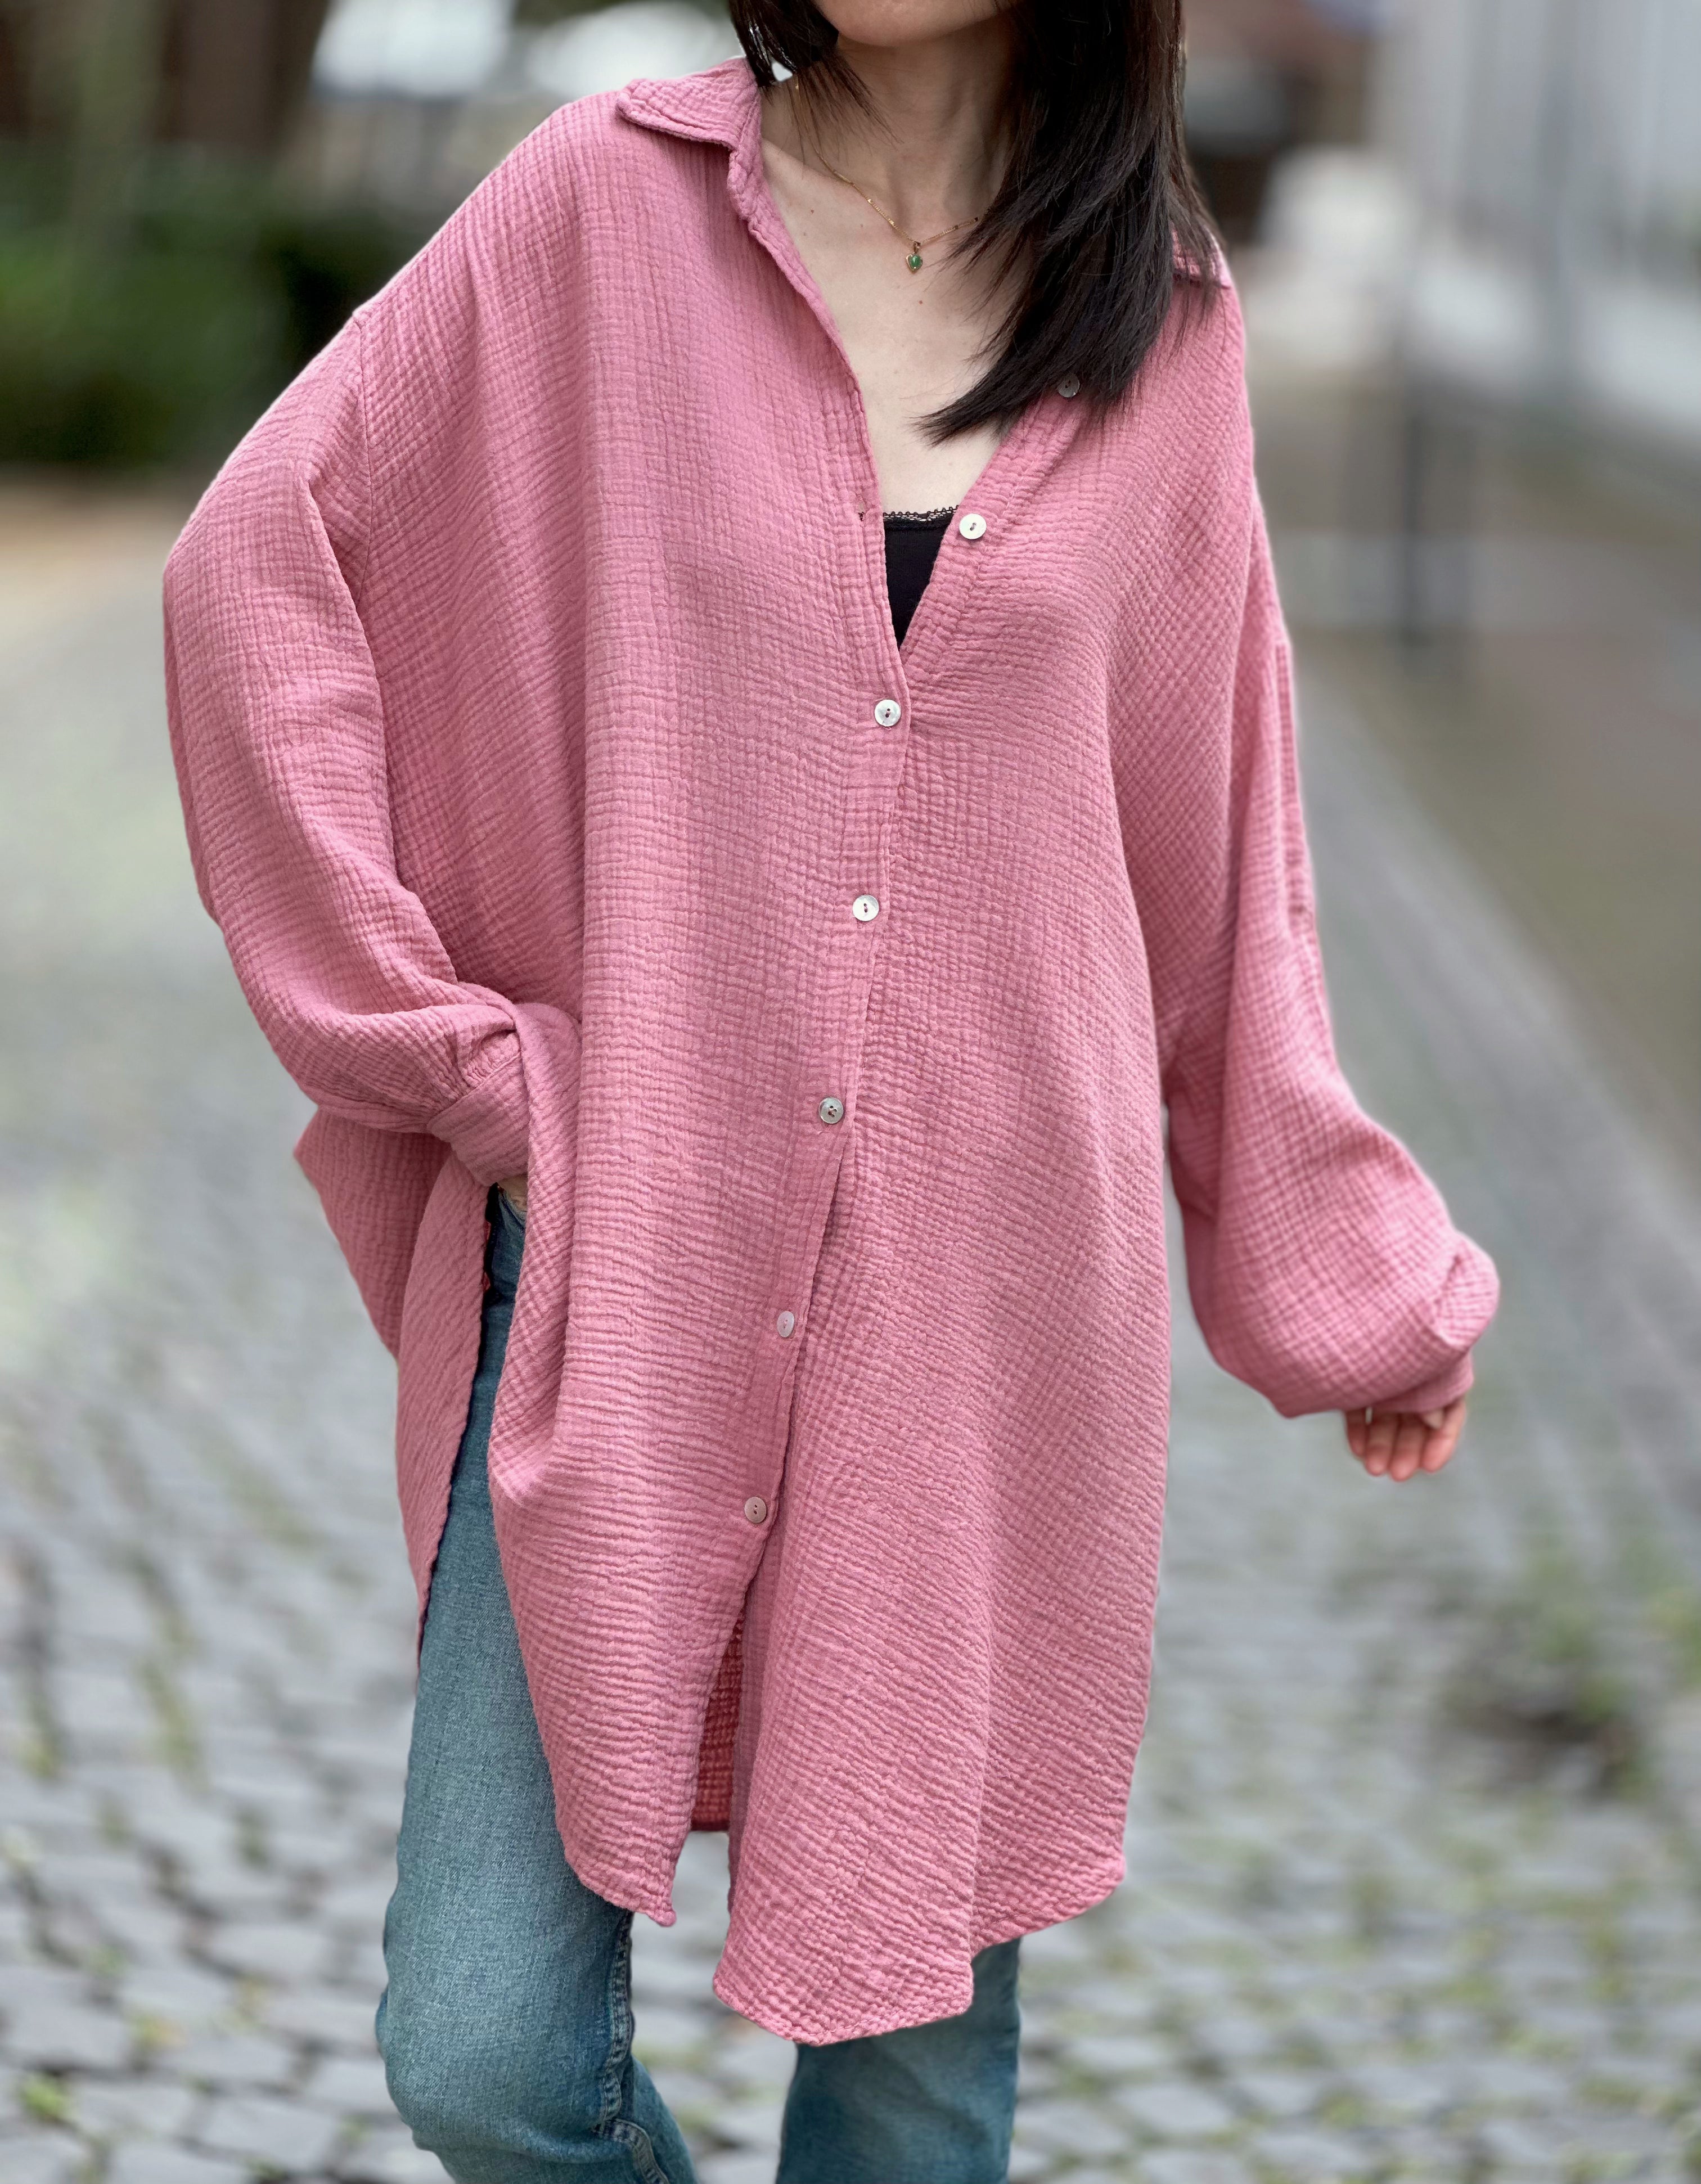 Musselin Bluse, long oversize, Beere